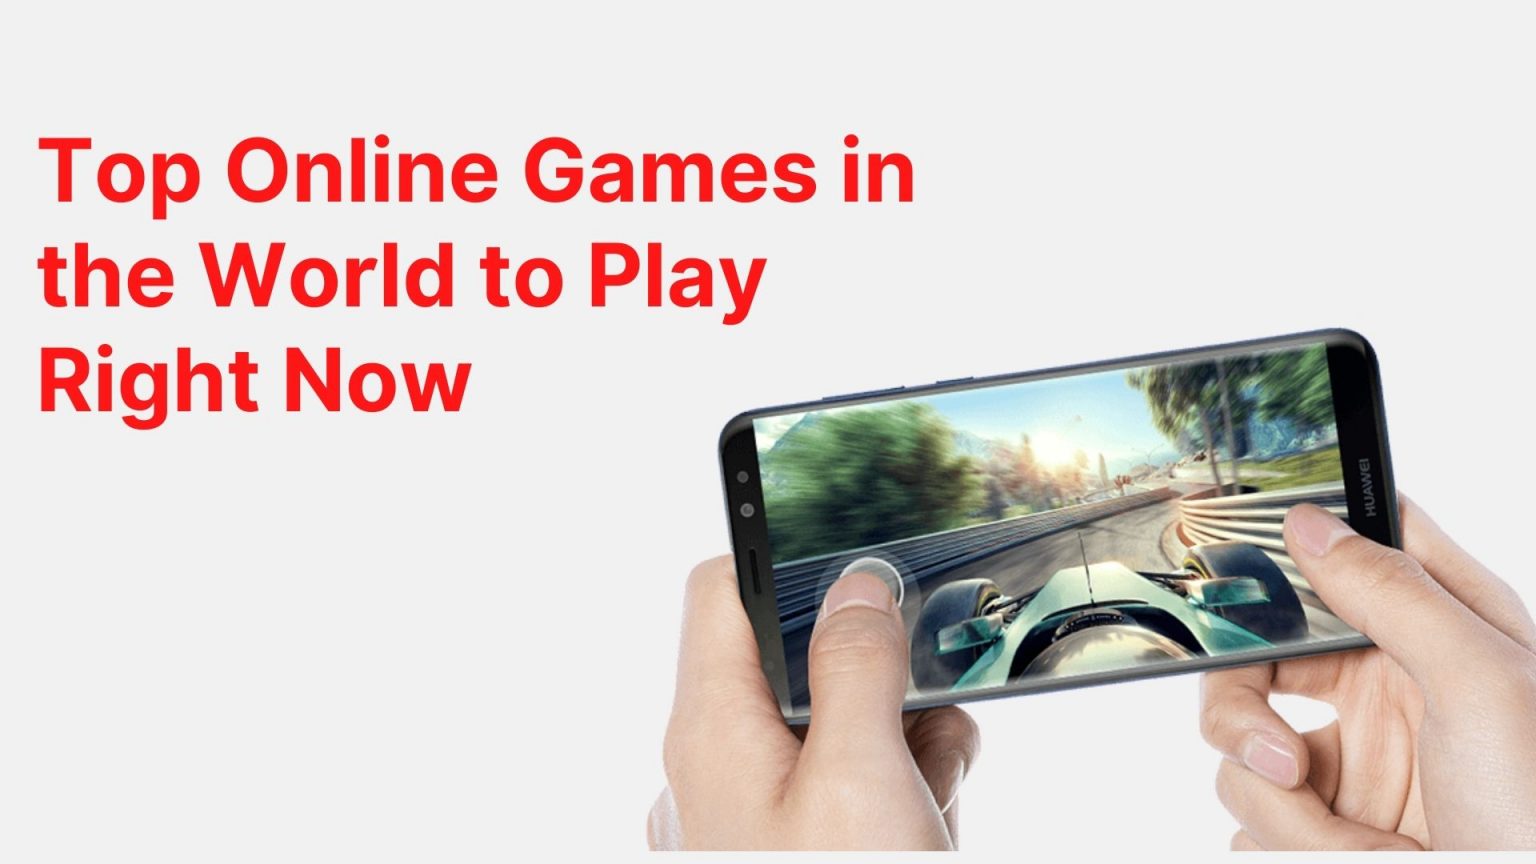 Top Online Games in the World to Play Right Now.